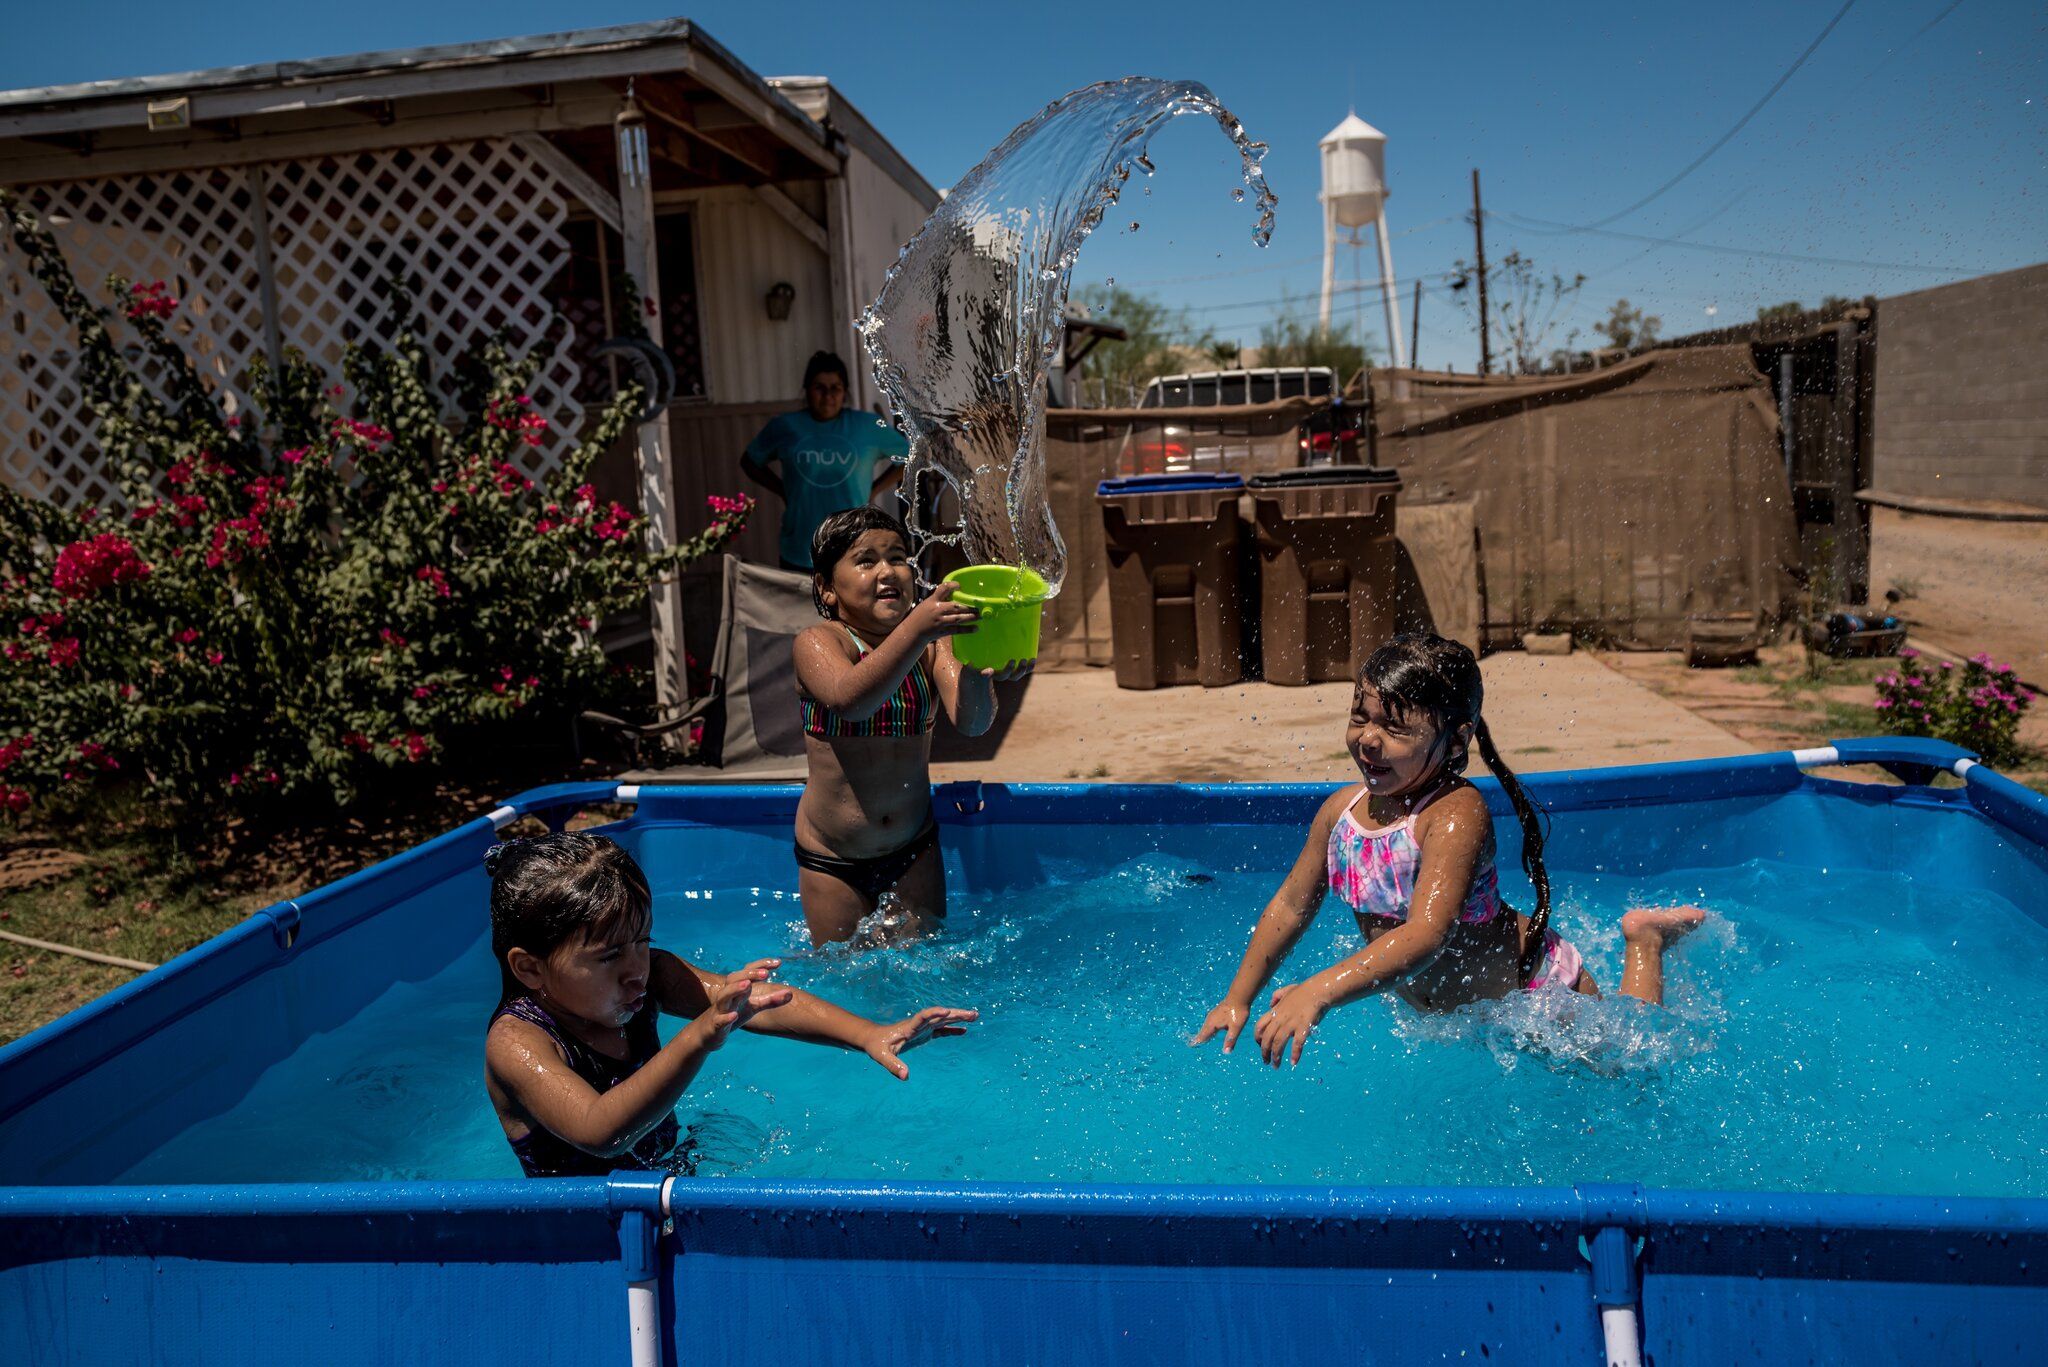 COOLIDGE, ARIZ. Marisela Felix set up a pool to keep her daughters and niece cool during 108-degree heat. Image by Meridith Kohut. United States, 2020.